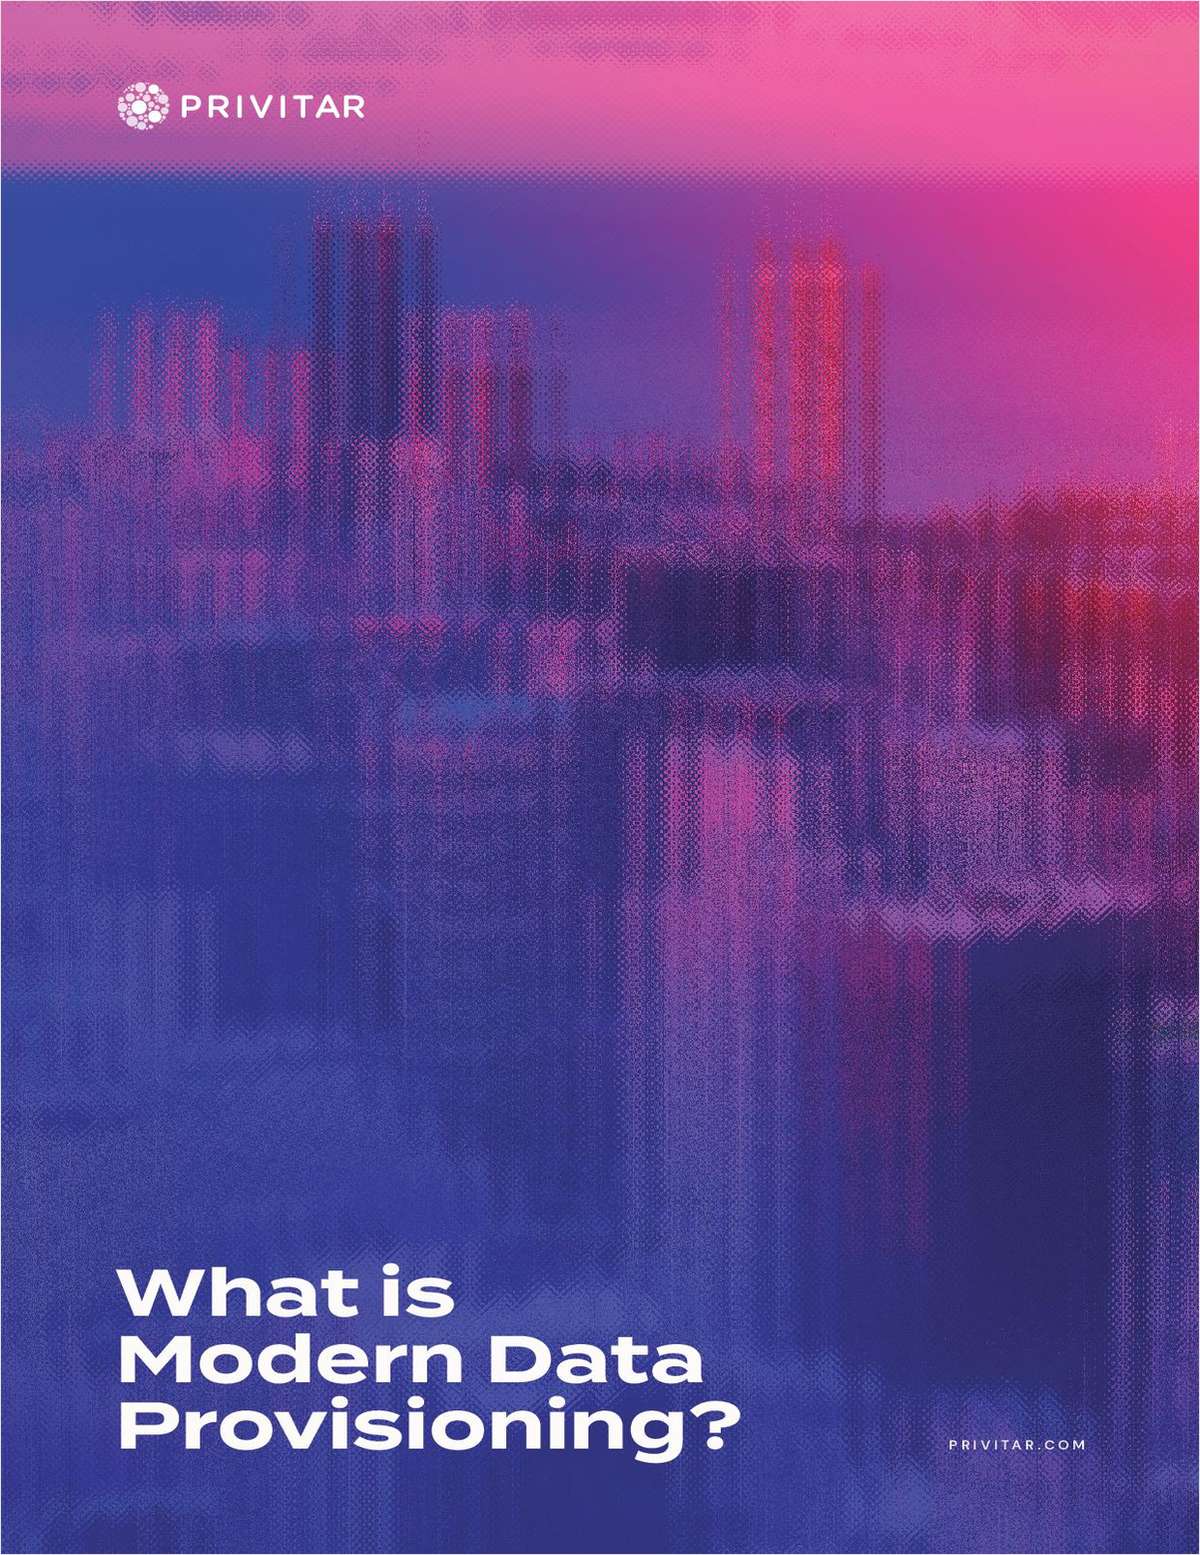 [Whitepaper] What is Modern Data Provisioning? Accelerate safe access to data and optimise efficiency without compromising privacy